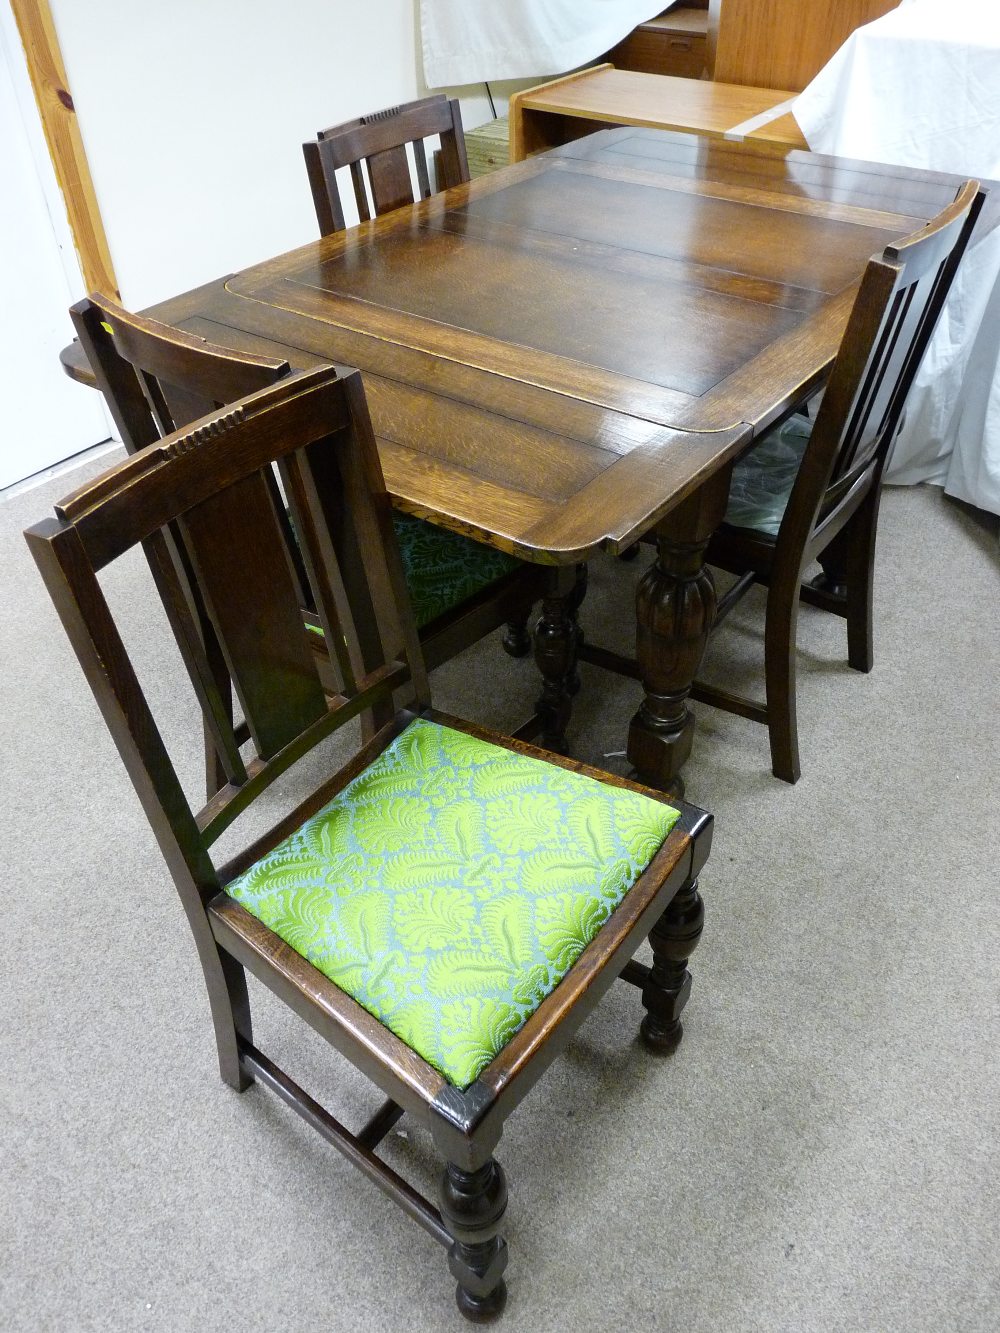 A 1930's POLISHED DRAW LEAF DINING TABLE with pineapple and block supports and four similar period